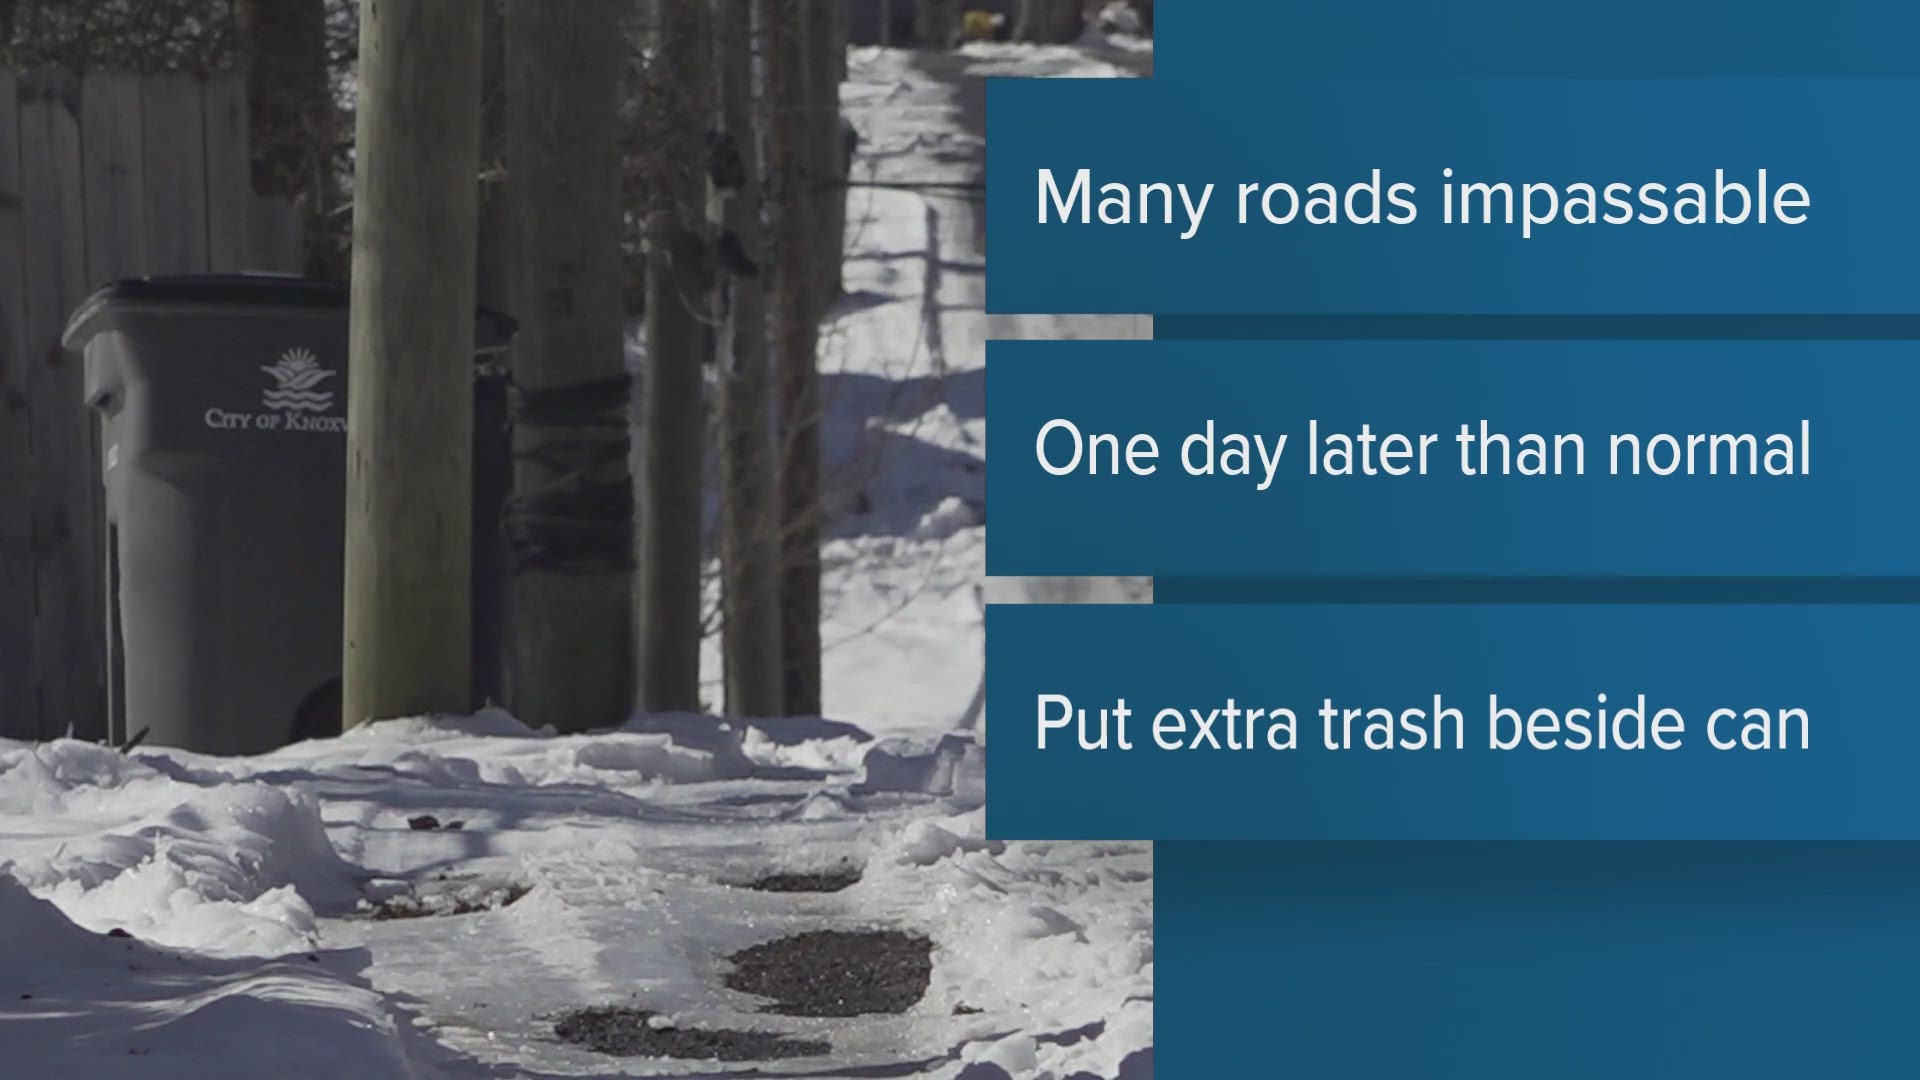 Waste Management officials tell us because so many roads are impassable, they have not been able to get their trucks out on them.